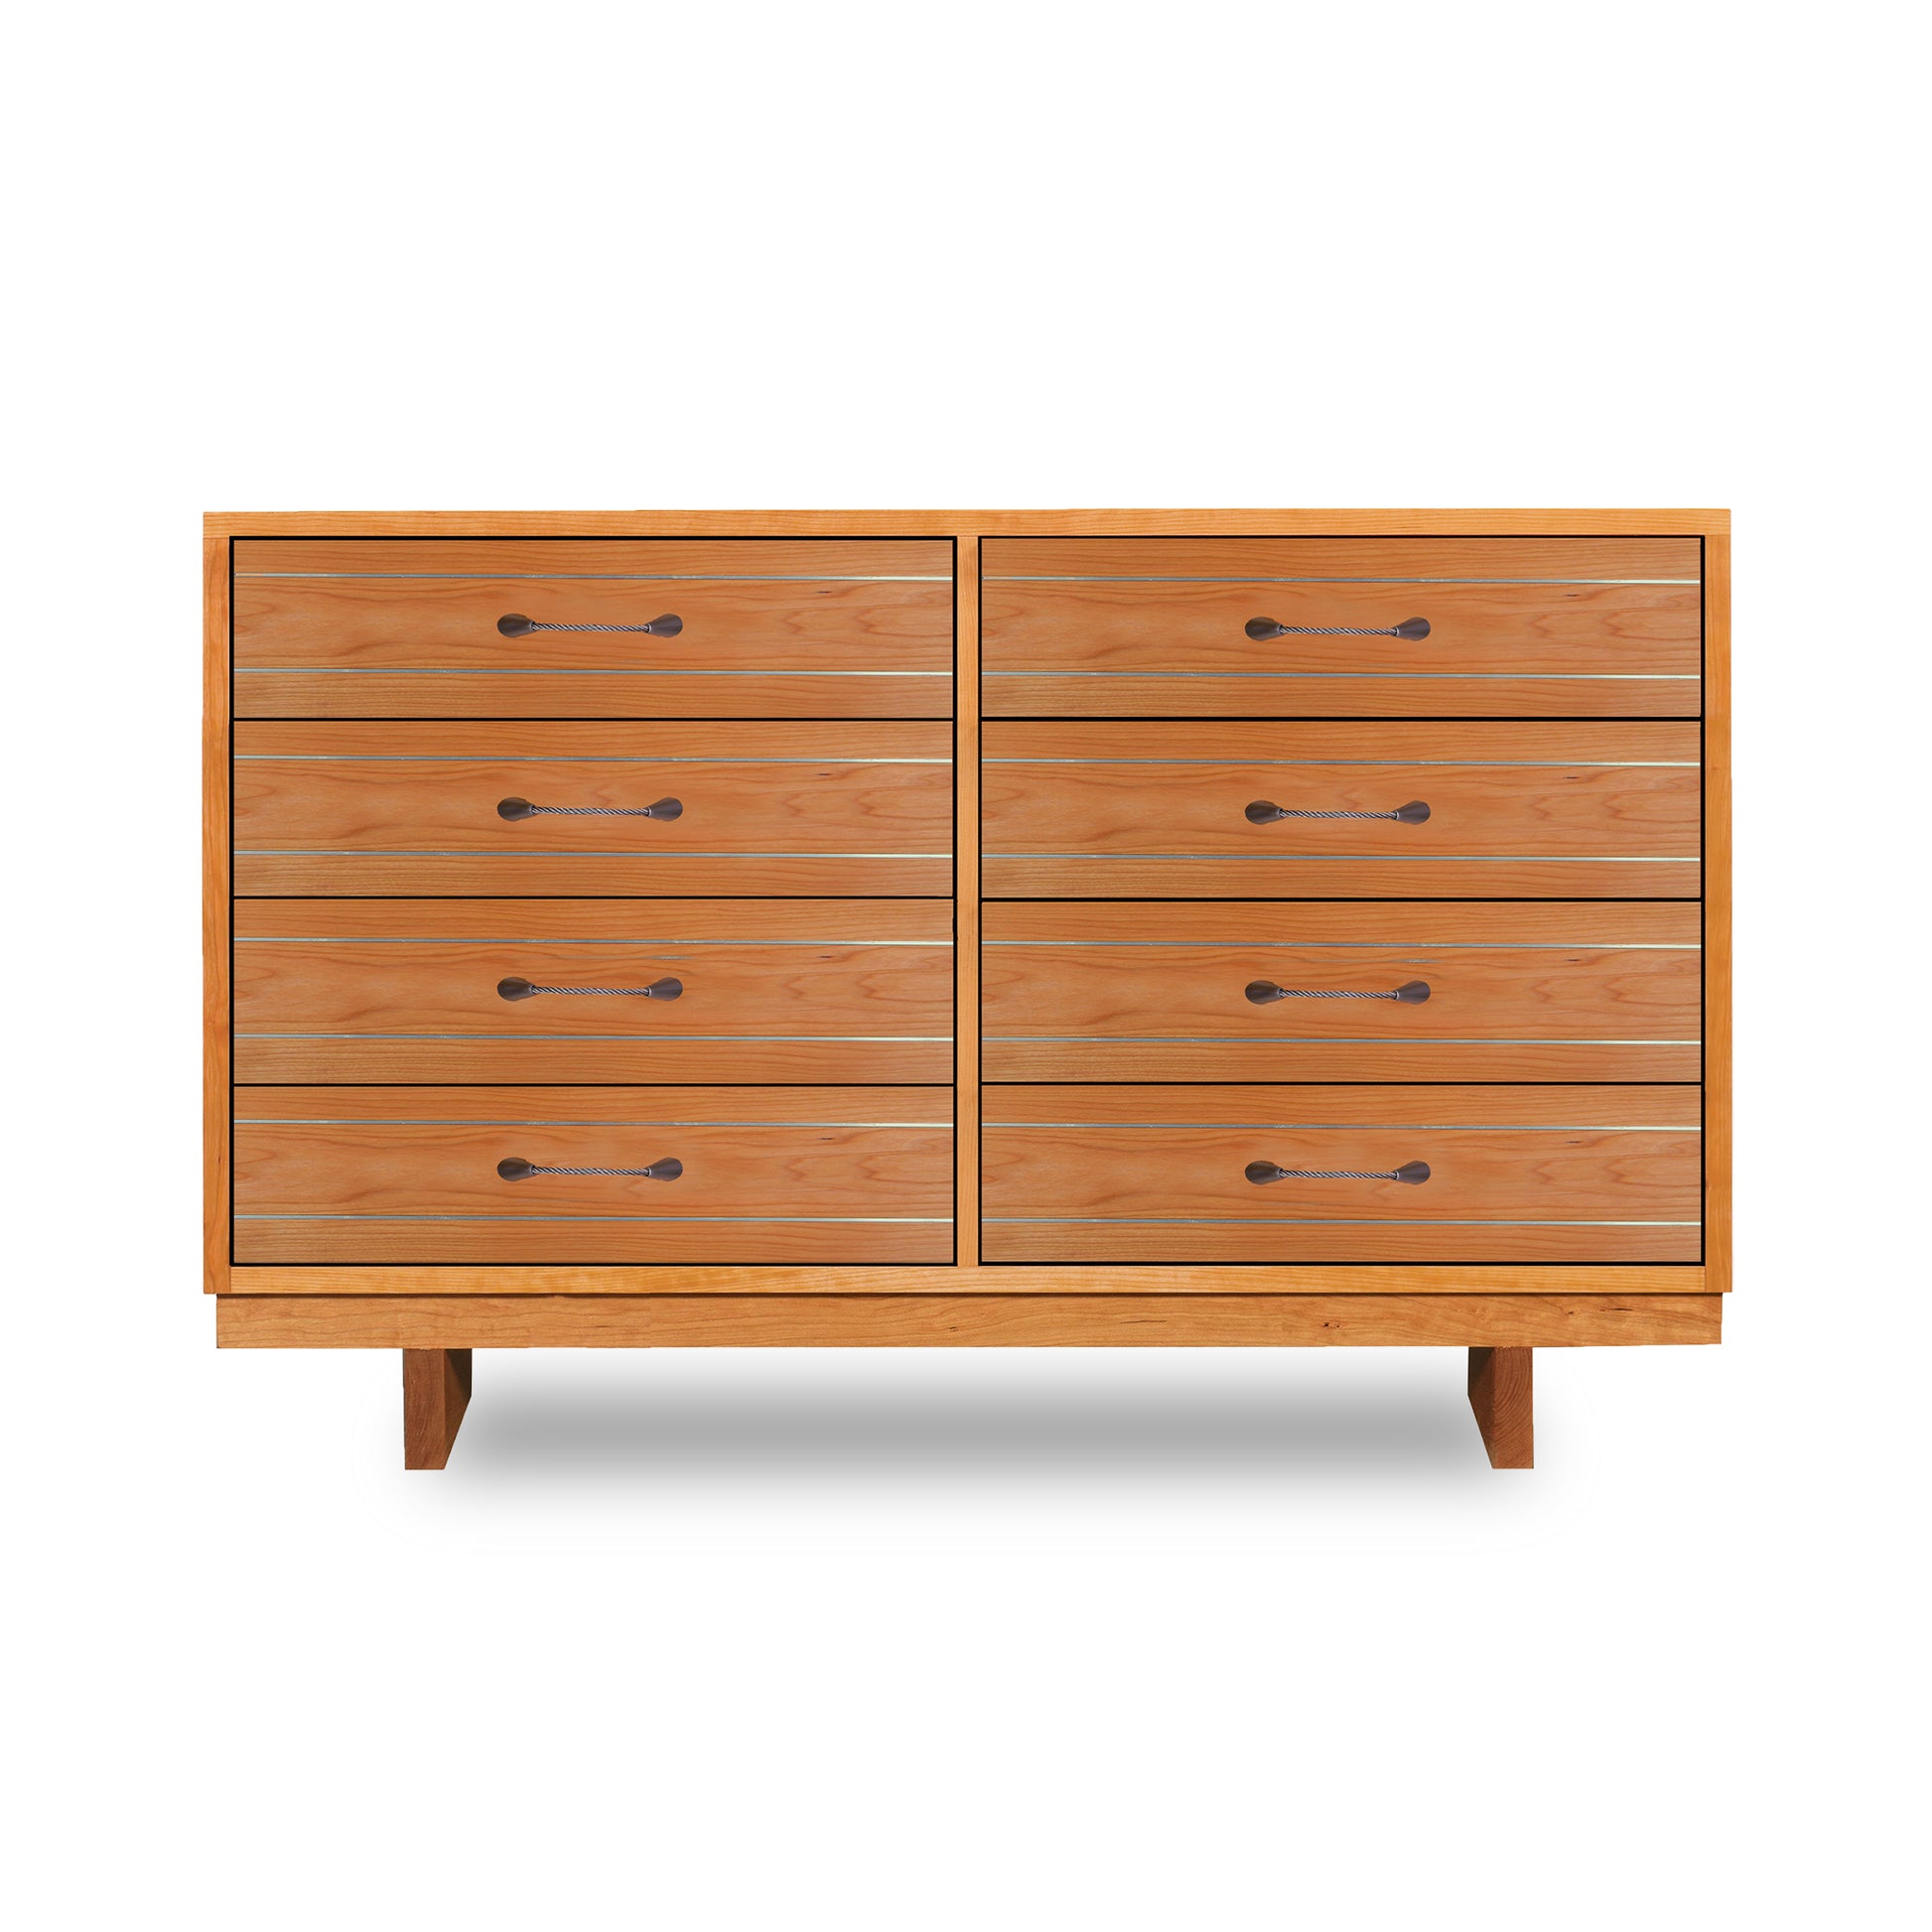 A Contemporary Cable 8-Drawer Dresser from Vermont Furniture Designs with eight drawers and round handles on a white background.